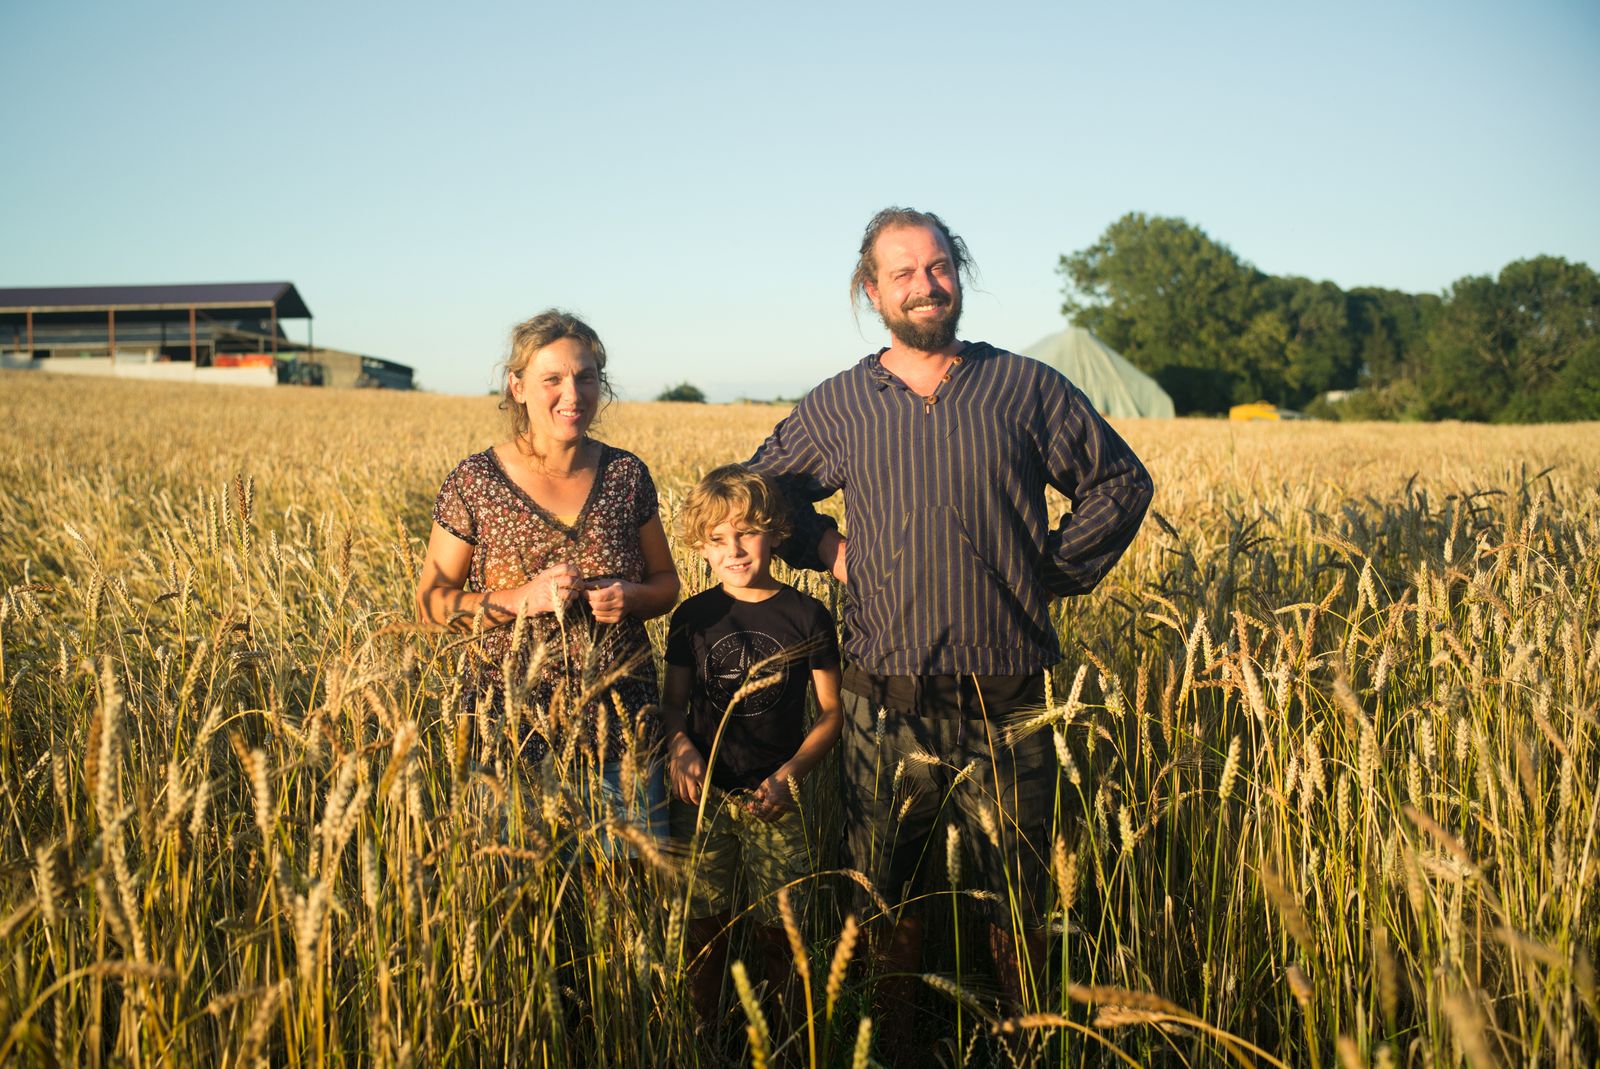 Seppe and Hilde from the Dubbeldoel farm, one of the farming families from our Cereal Collective.